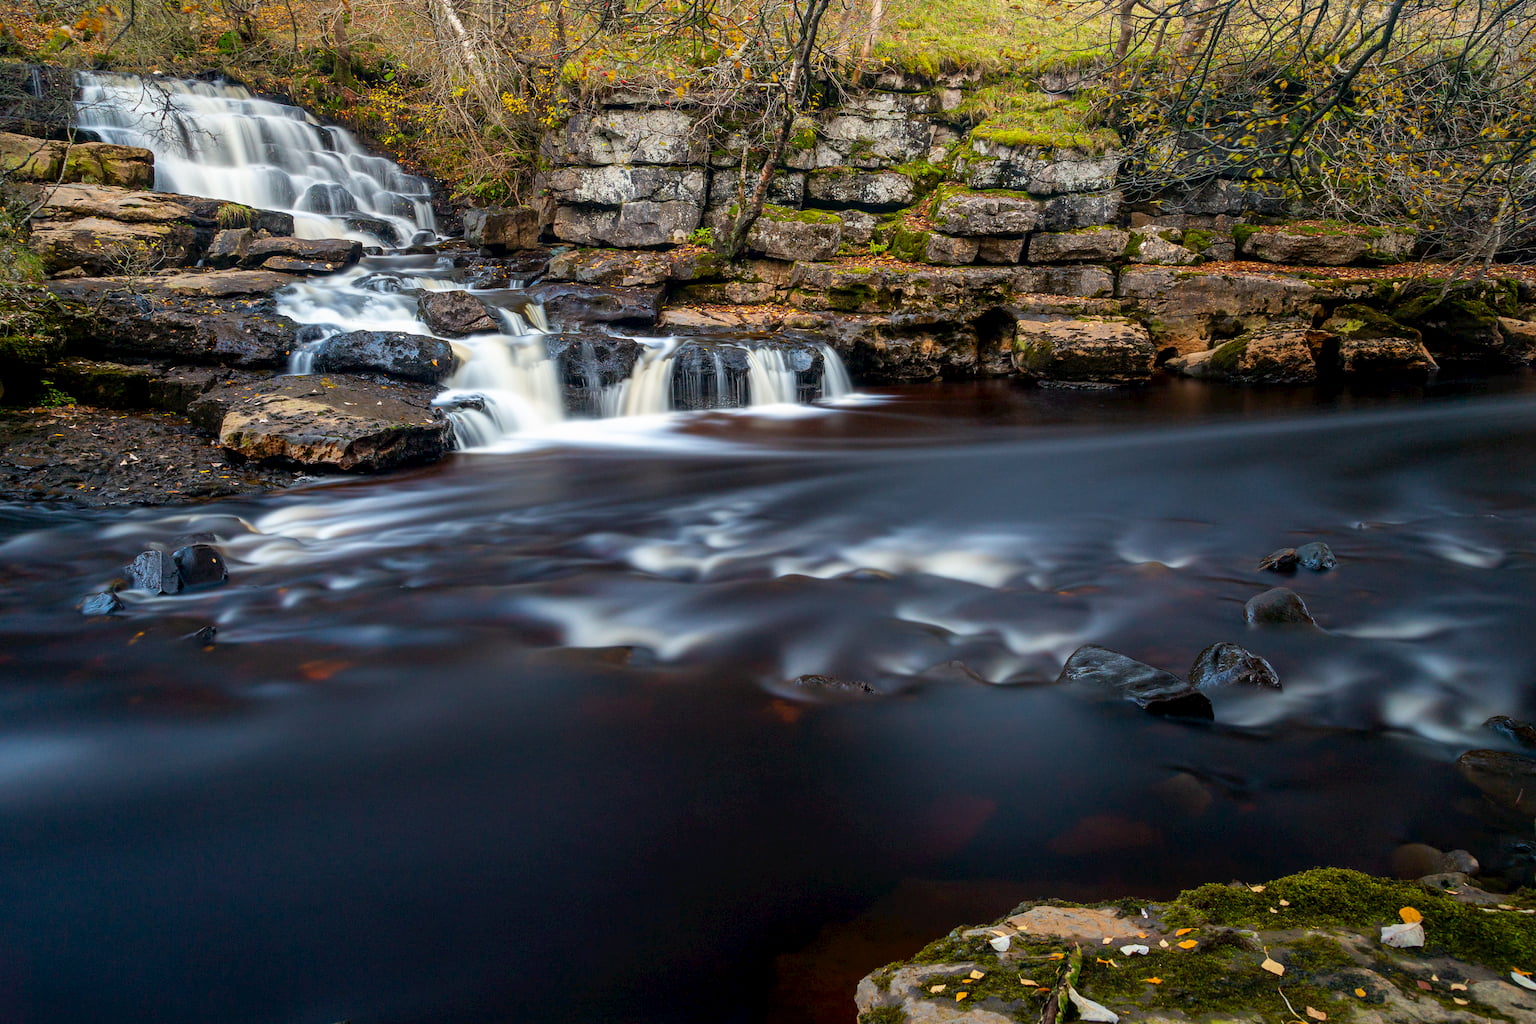 Long exposure photograph of Lower East Gill Force waterfall in Swaledale, North Yorkshire.